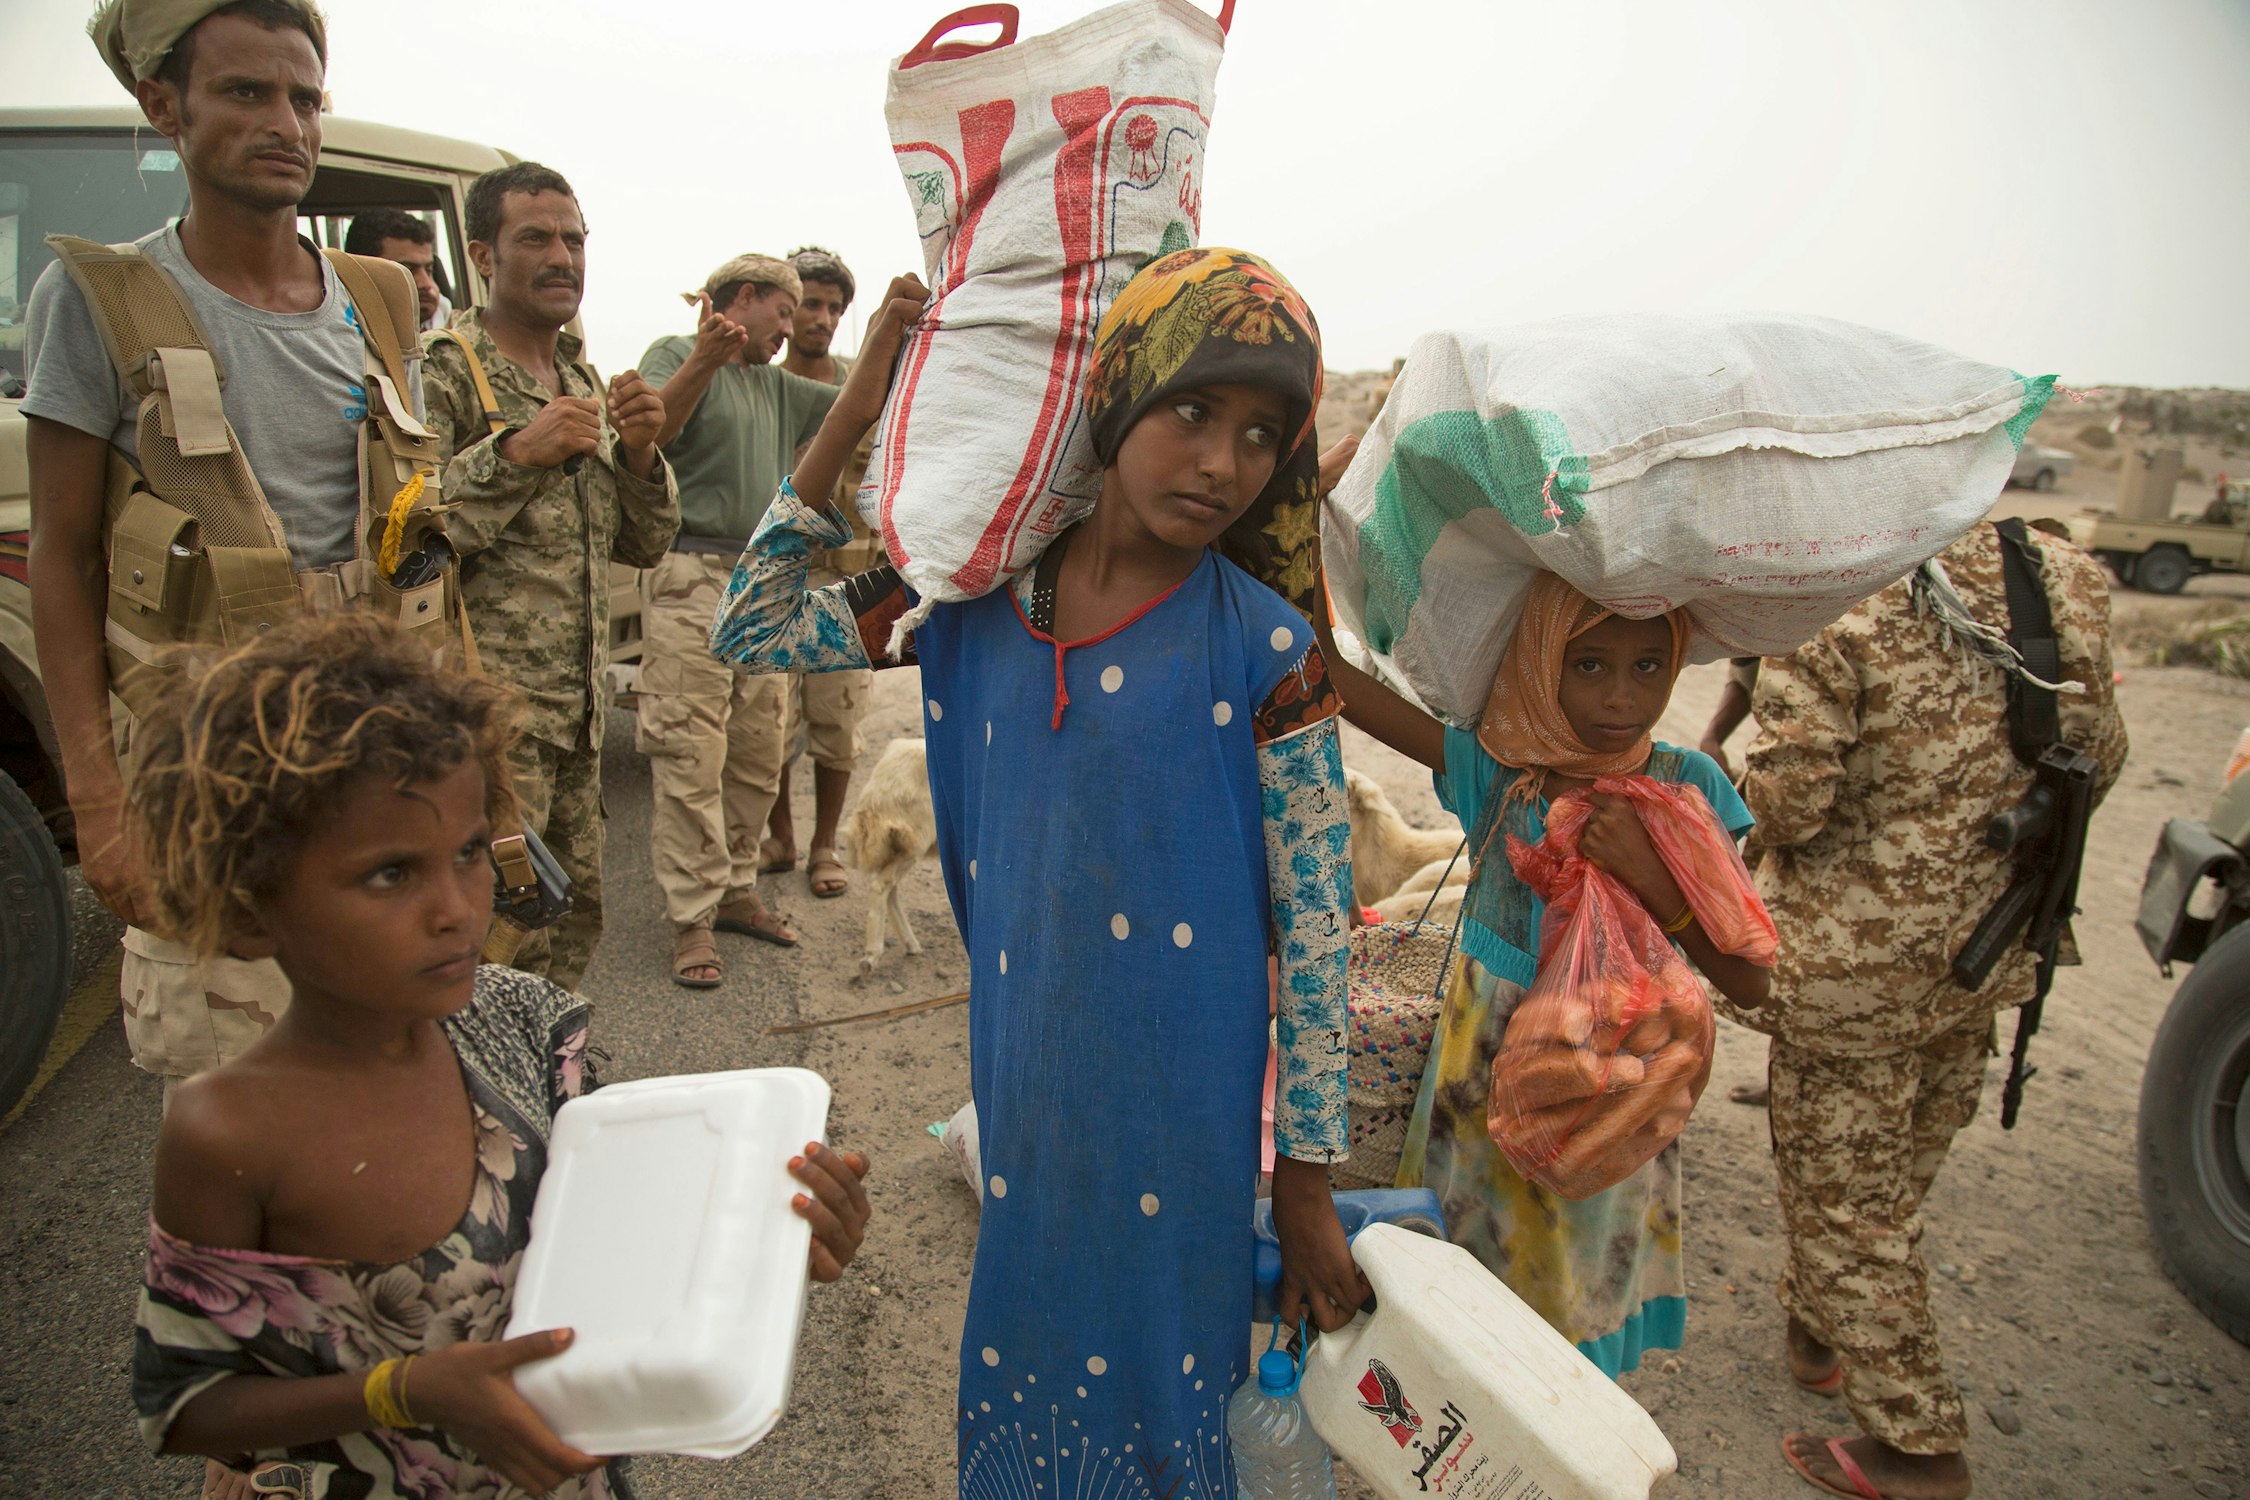 Q&A: Yemen's Humanitarian Catastrophe Demands Action - Open Society Foundations